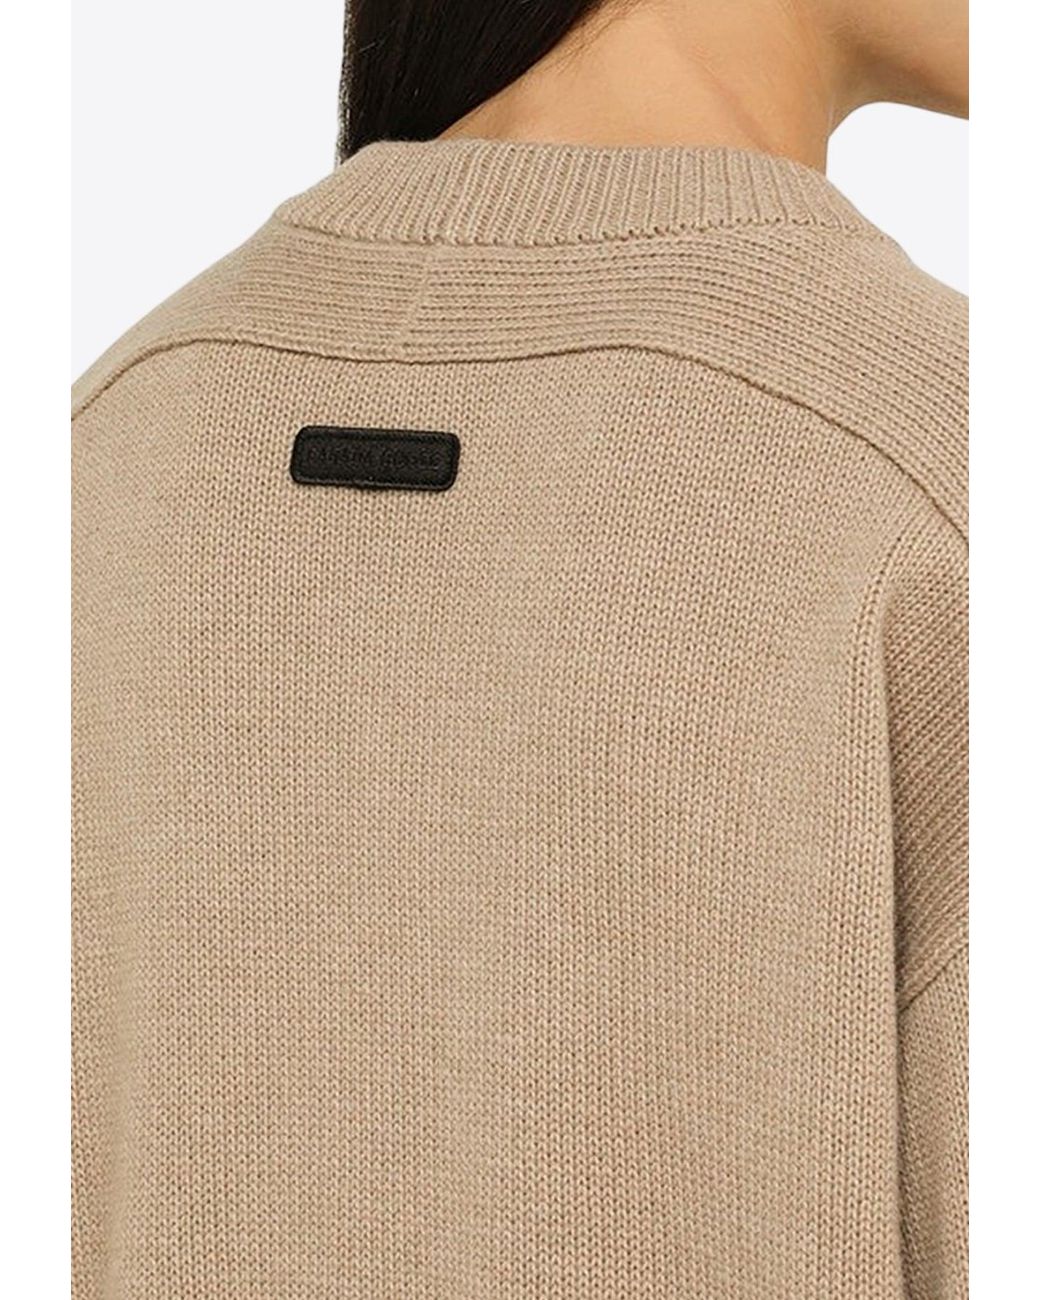 Canada Goose Wool Crewneck Sweater in Natural | Lyst